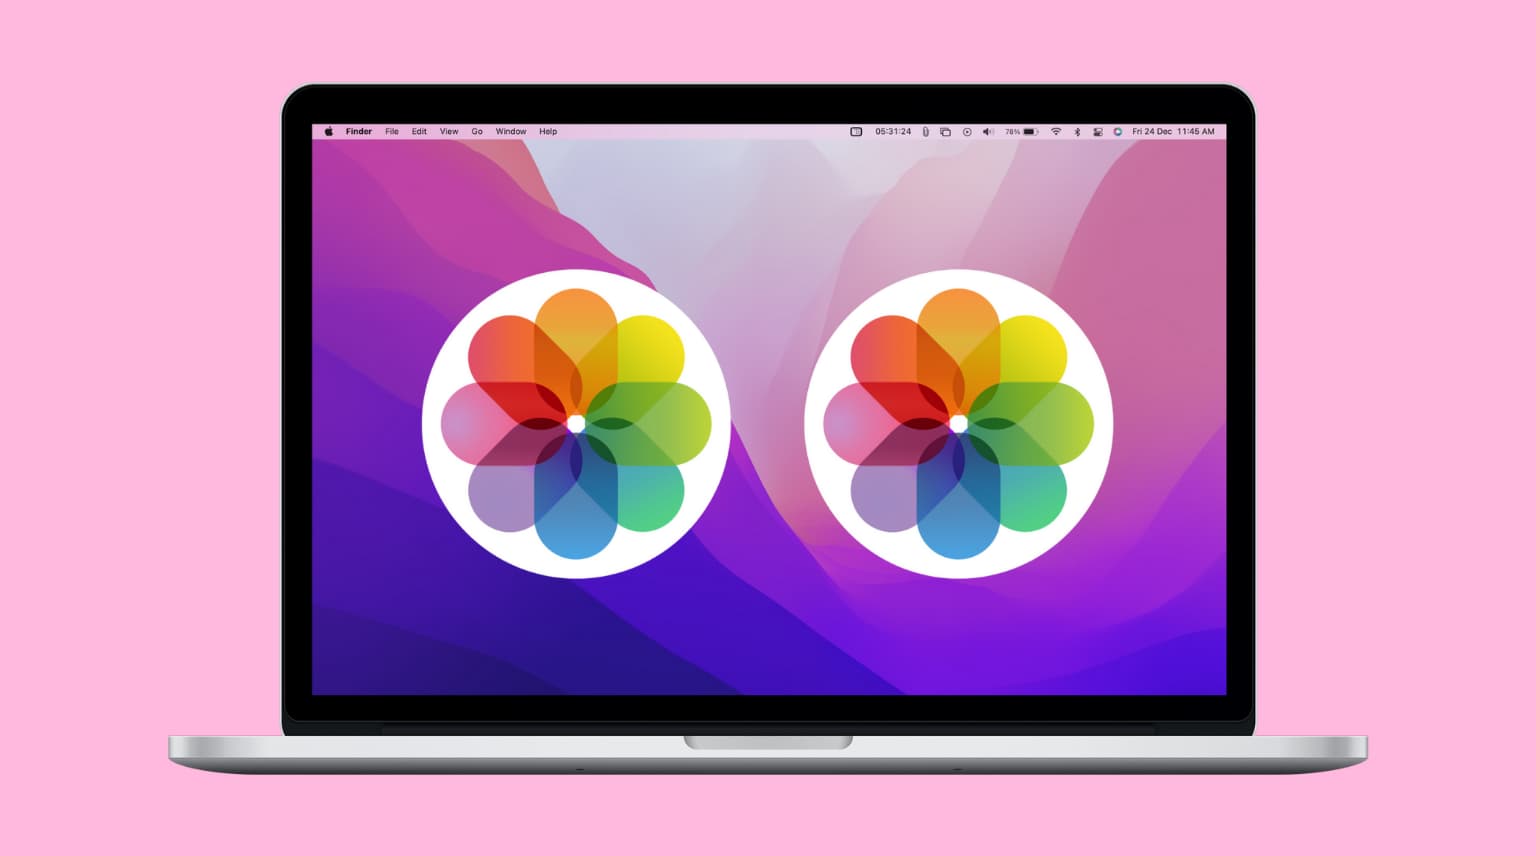 How to find and remove all duplicate photos on Mac